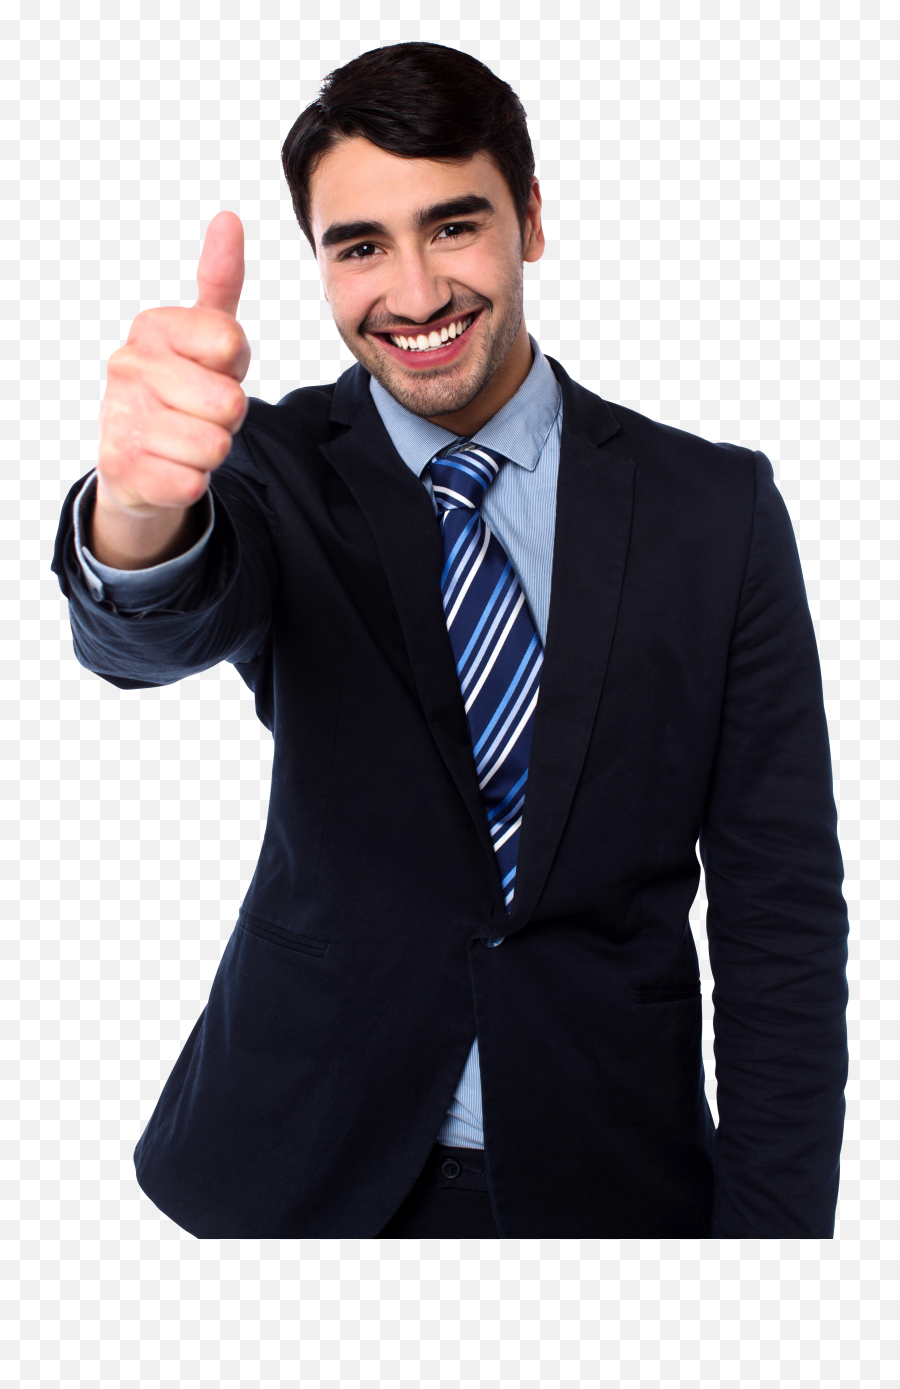 Men Pointing Thumbs Up Png Image Full Size Png Download Emoji,Arrow Pointing Up Emoji